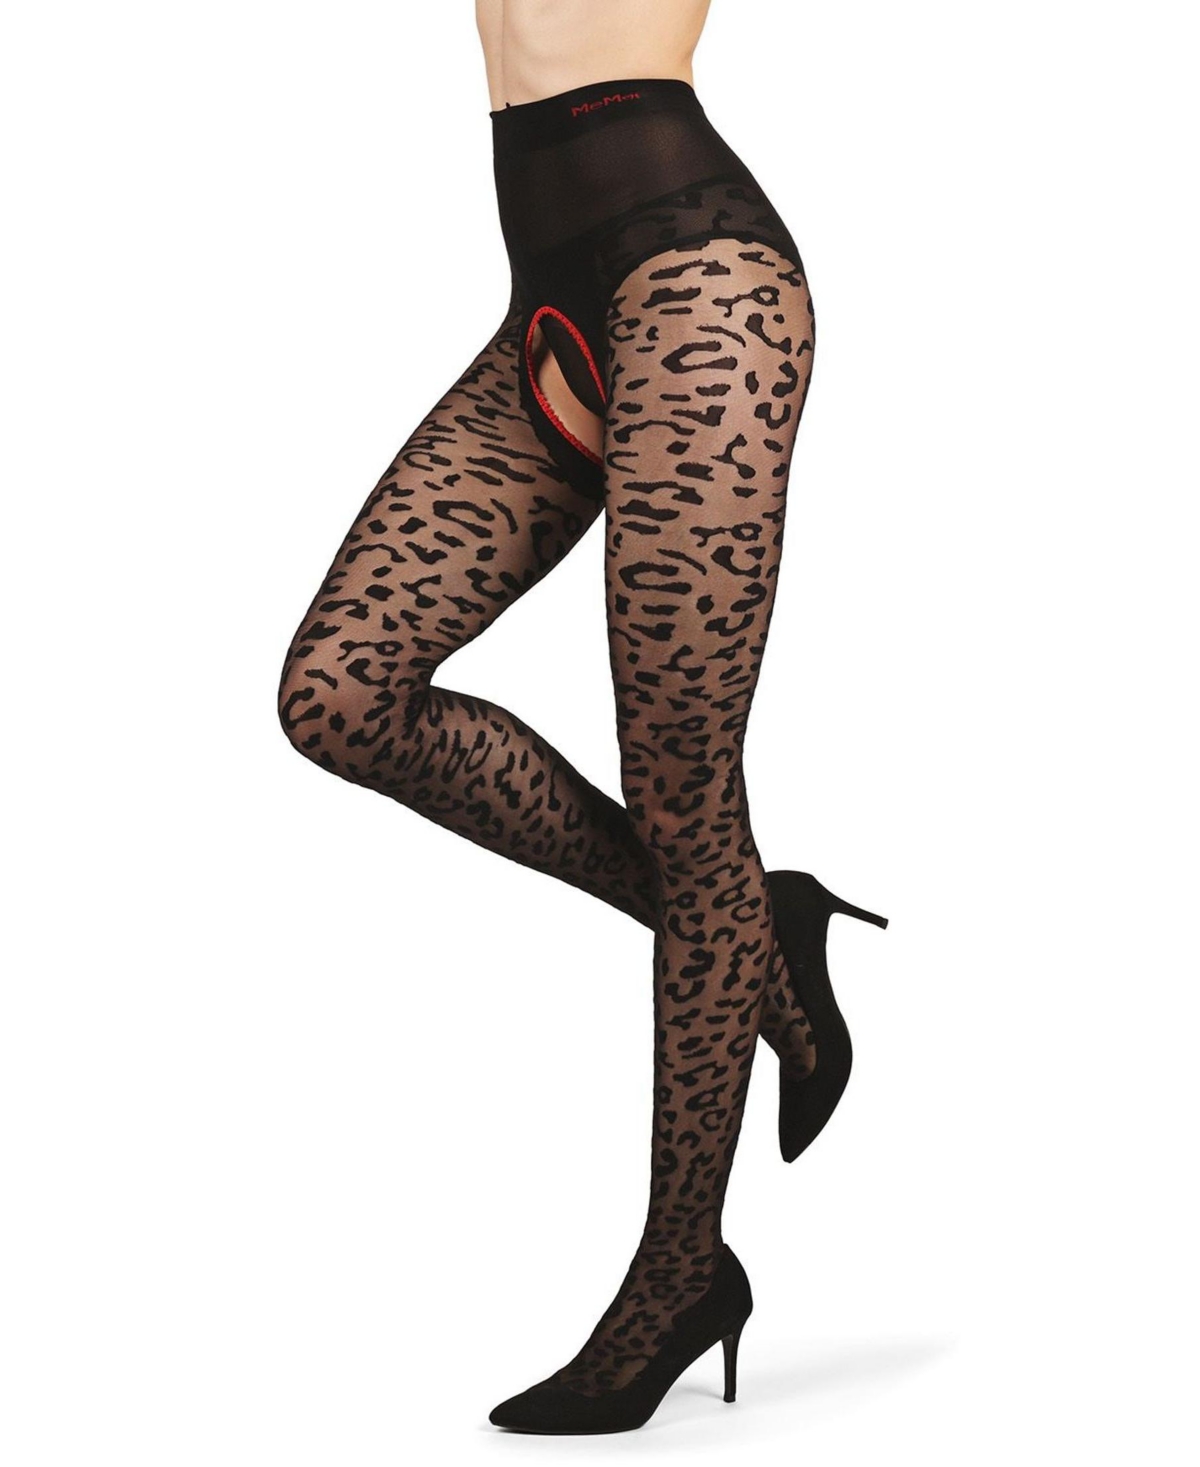 Women's Born To Be Wild Leopard Crotchless Sheer Pantyhose - Multi